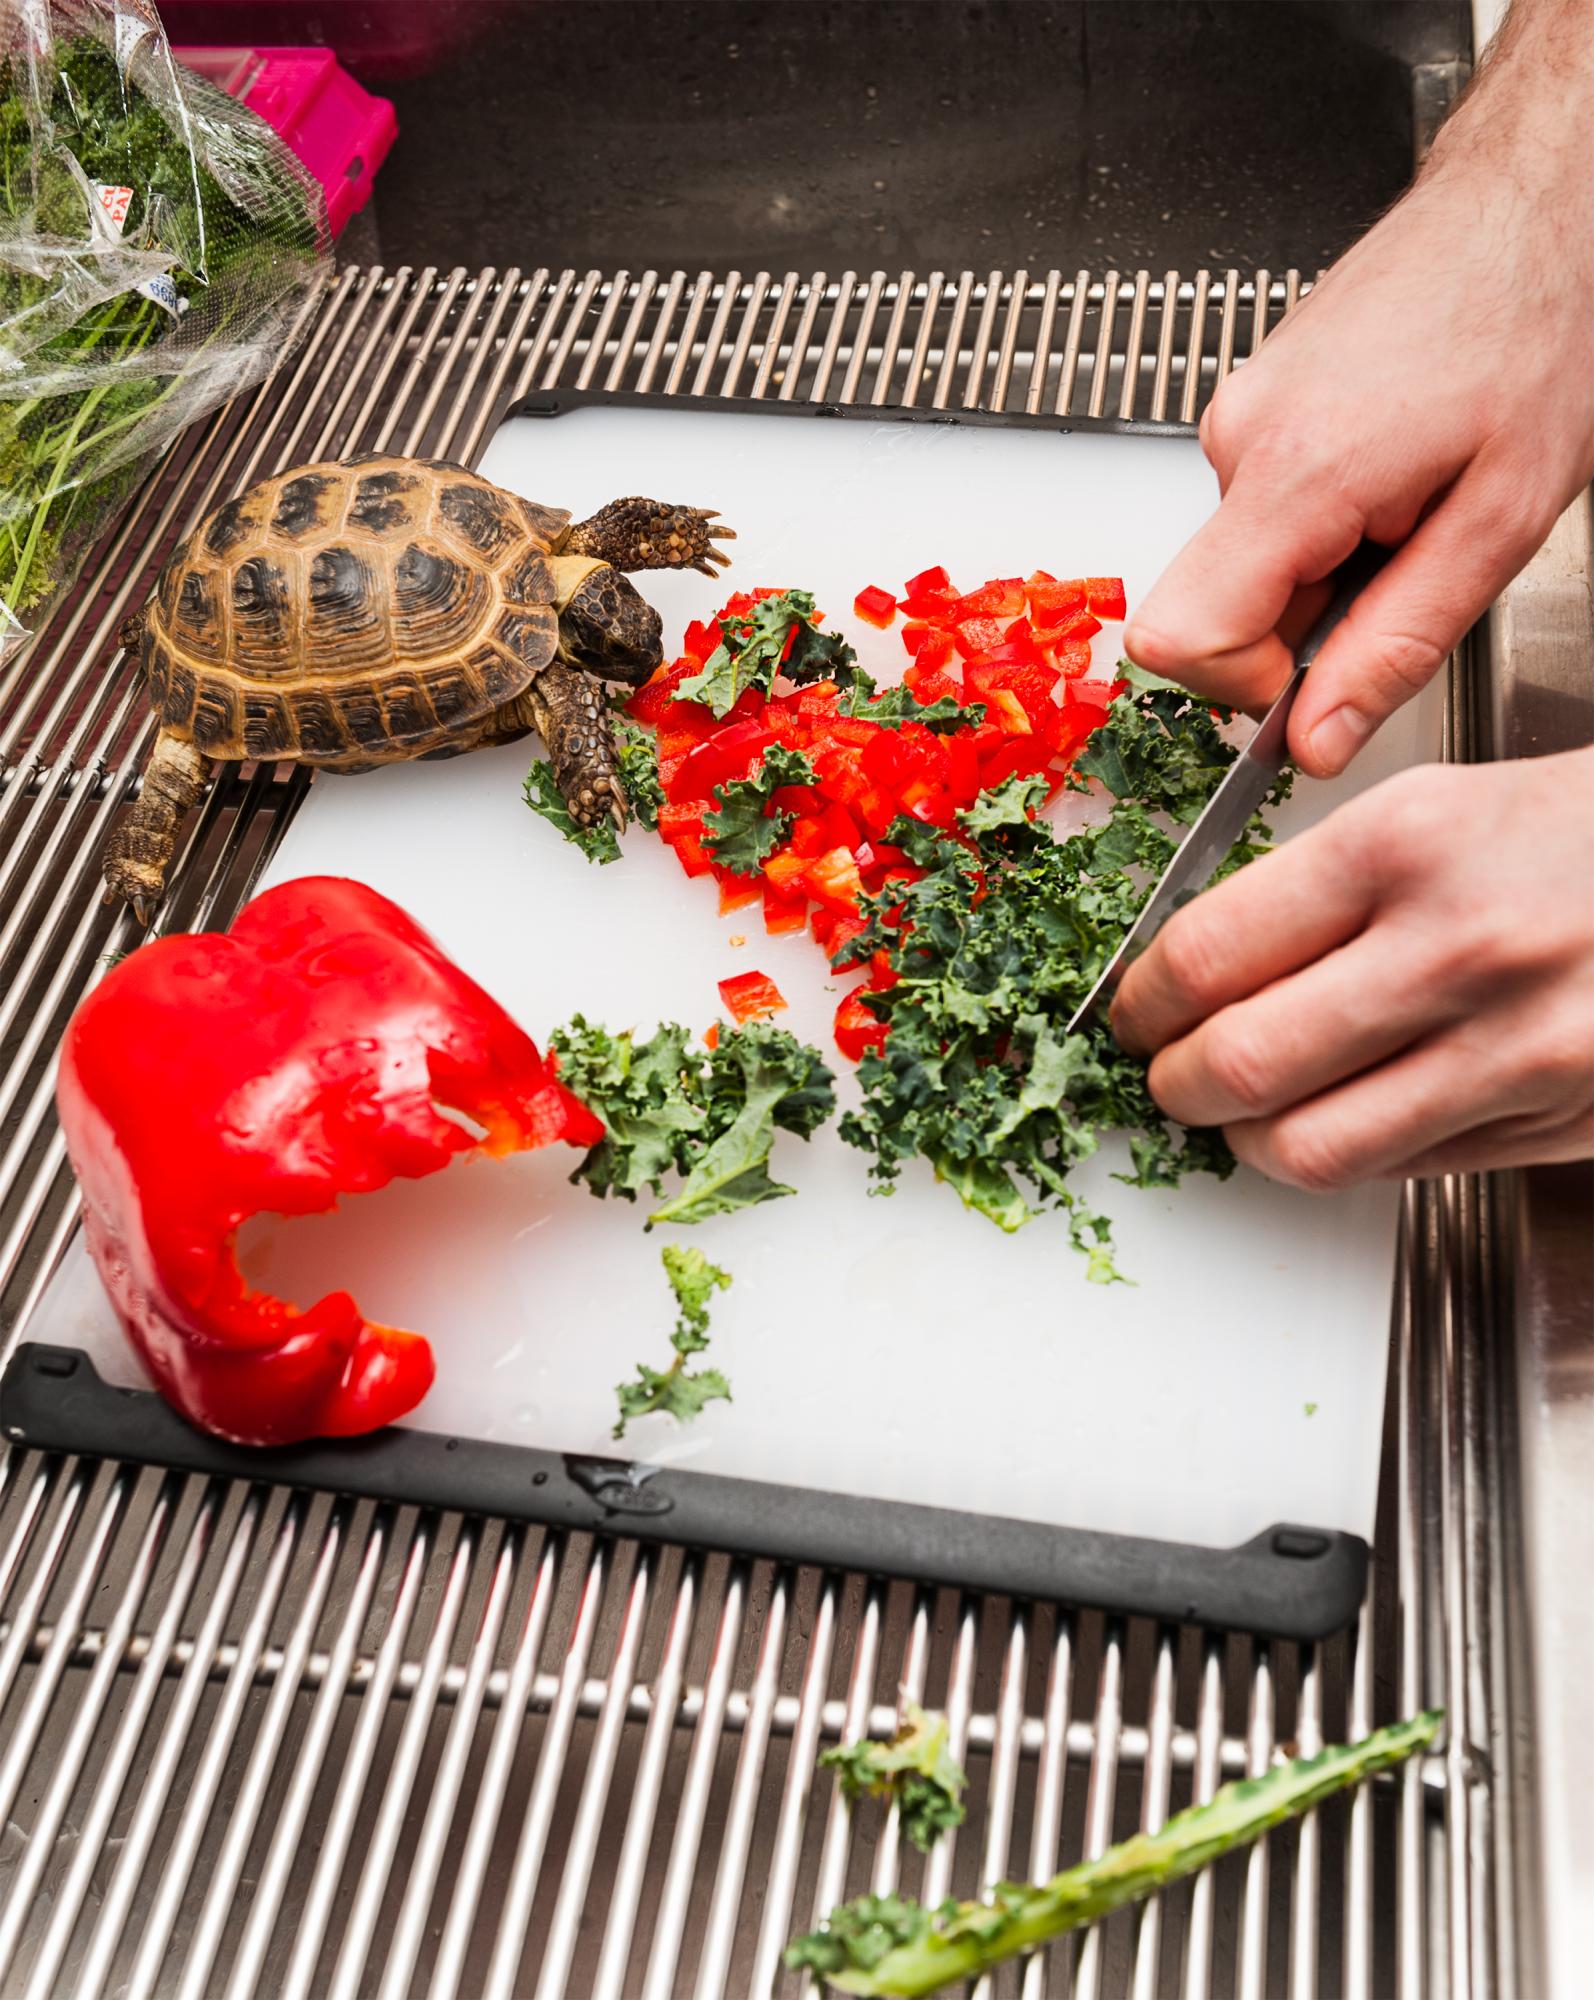 Displaced - Preparing lunch for a Russian Tortoise.